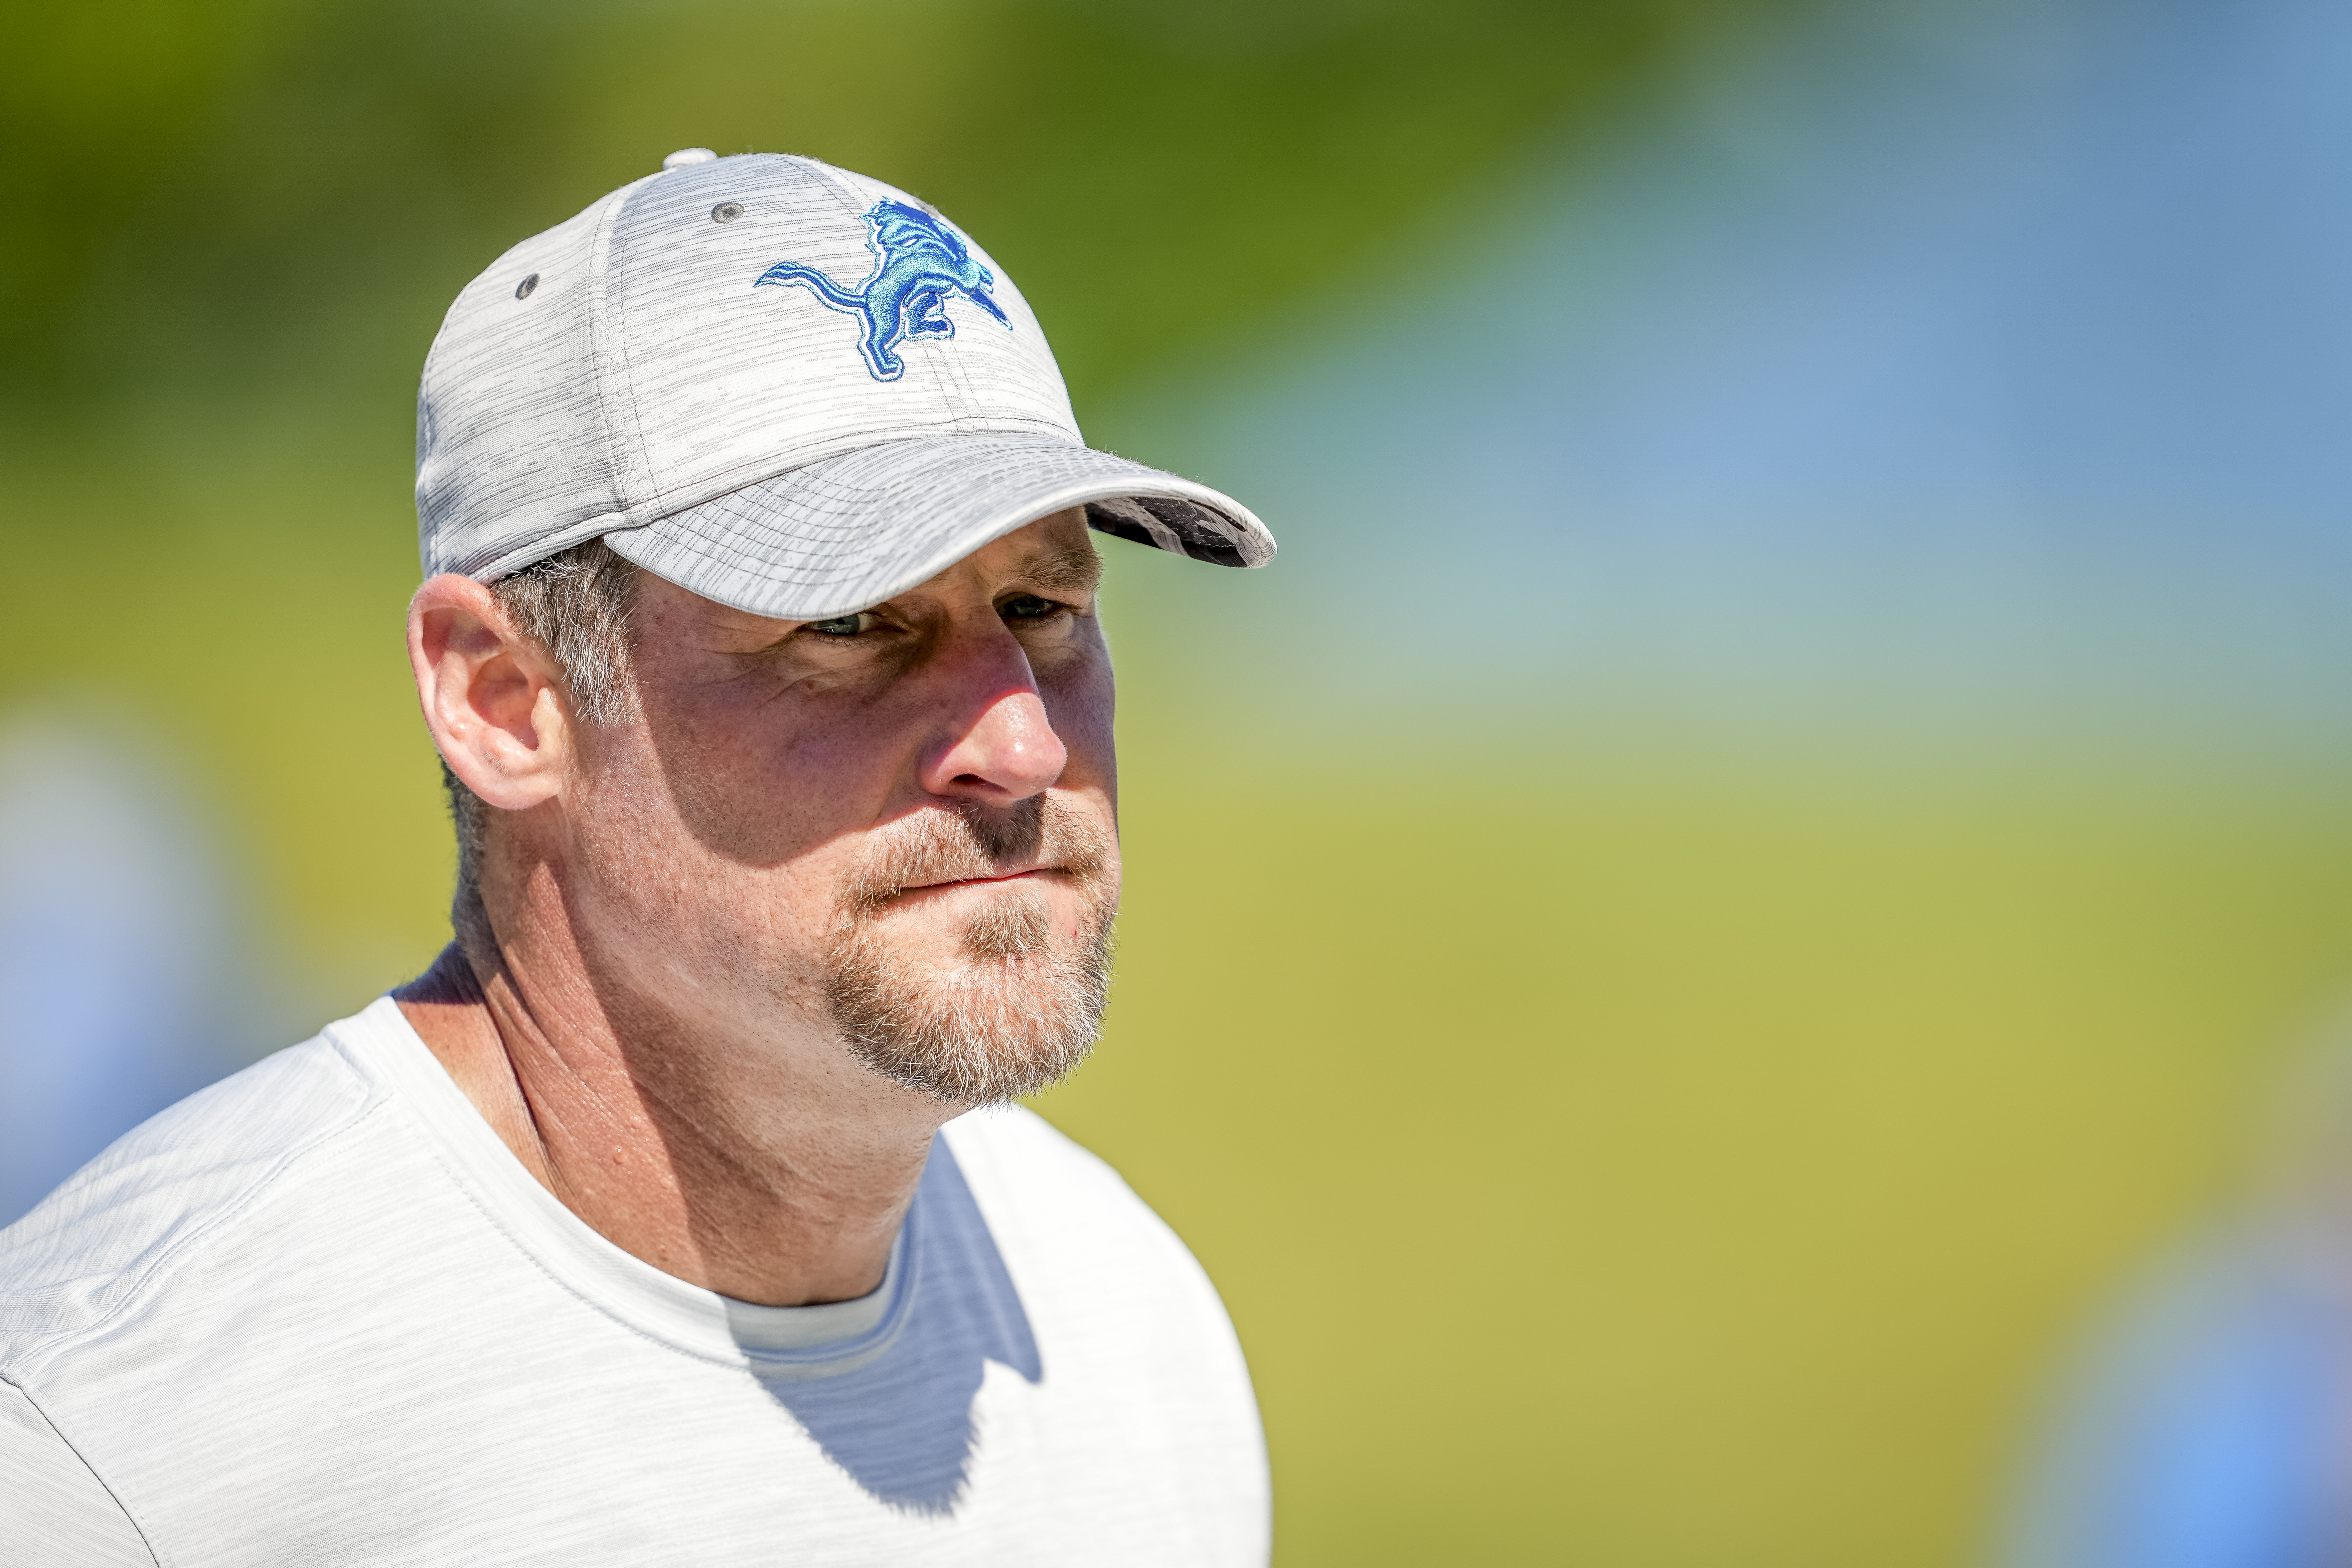 Head coach Dan Campbell of the Detroit Lions looks on after the Detroit Lions Training Camp at the Lions Headquarters and Training Facility on July 29, 2022 in Allen Park, Michigan.